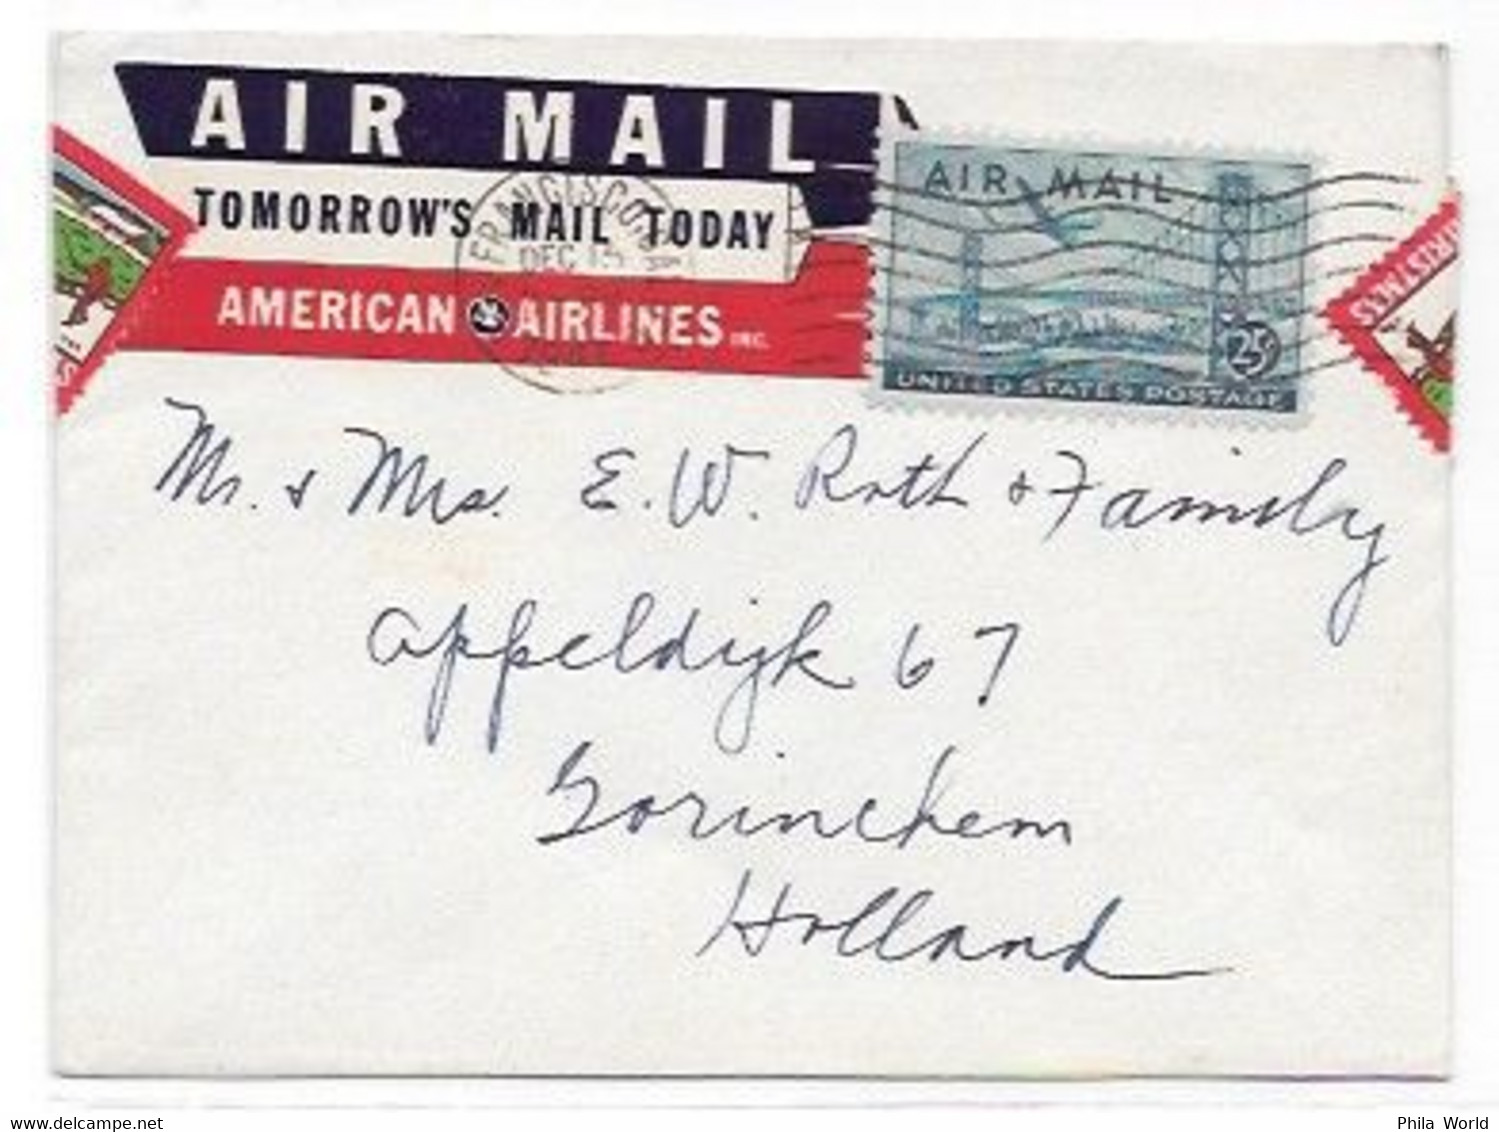 AMERICAN AIRLINES - 1947 US Air Mail Cover To HOLLAND + Tomorrow's Mail Today LABEL Of The Company + MERRY CHRISTMAS - Flugzeuge